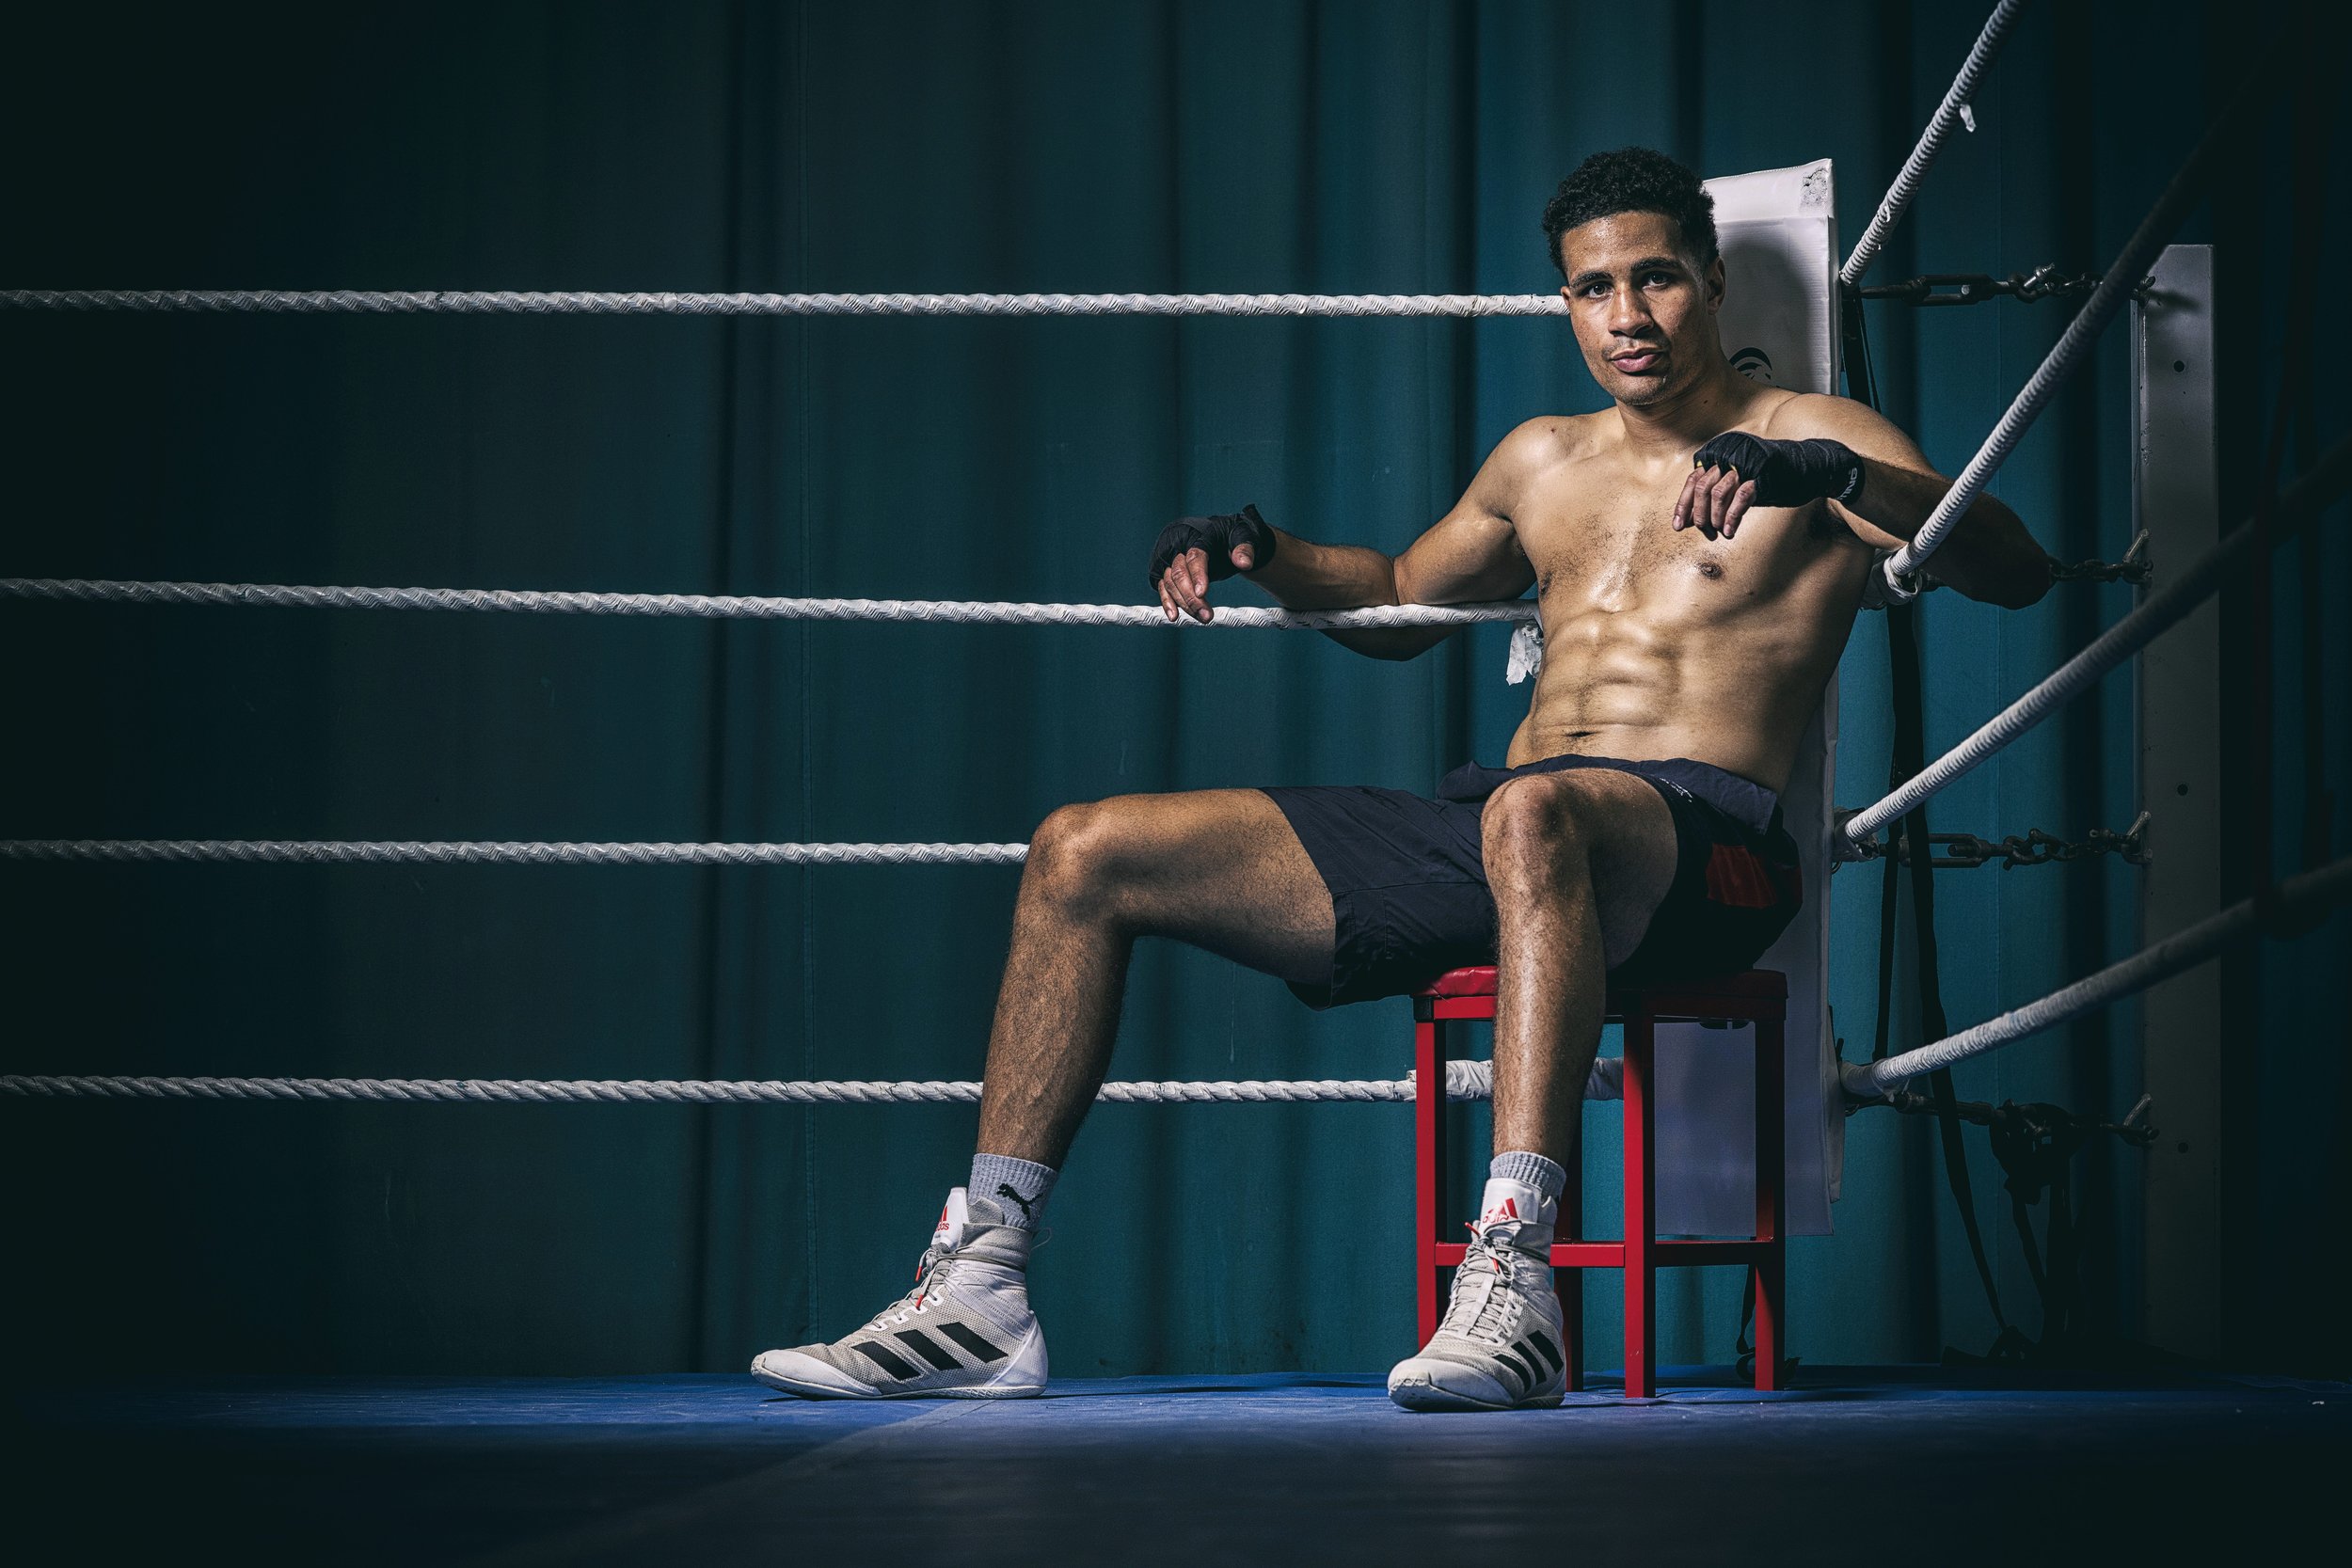  GB boxer Delicious Oriepictured at Sheffield training center Photo Paul Cooper 